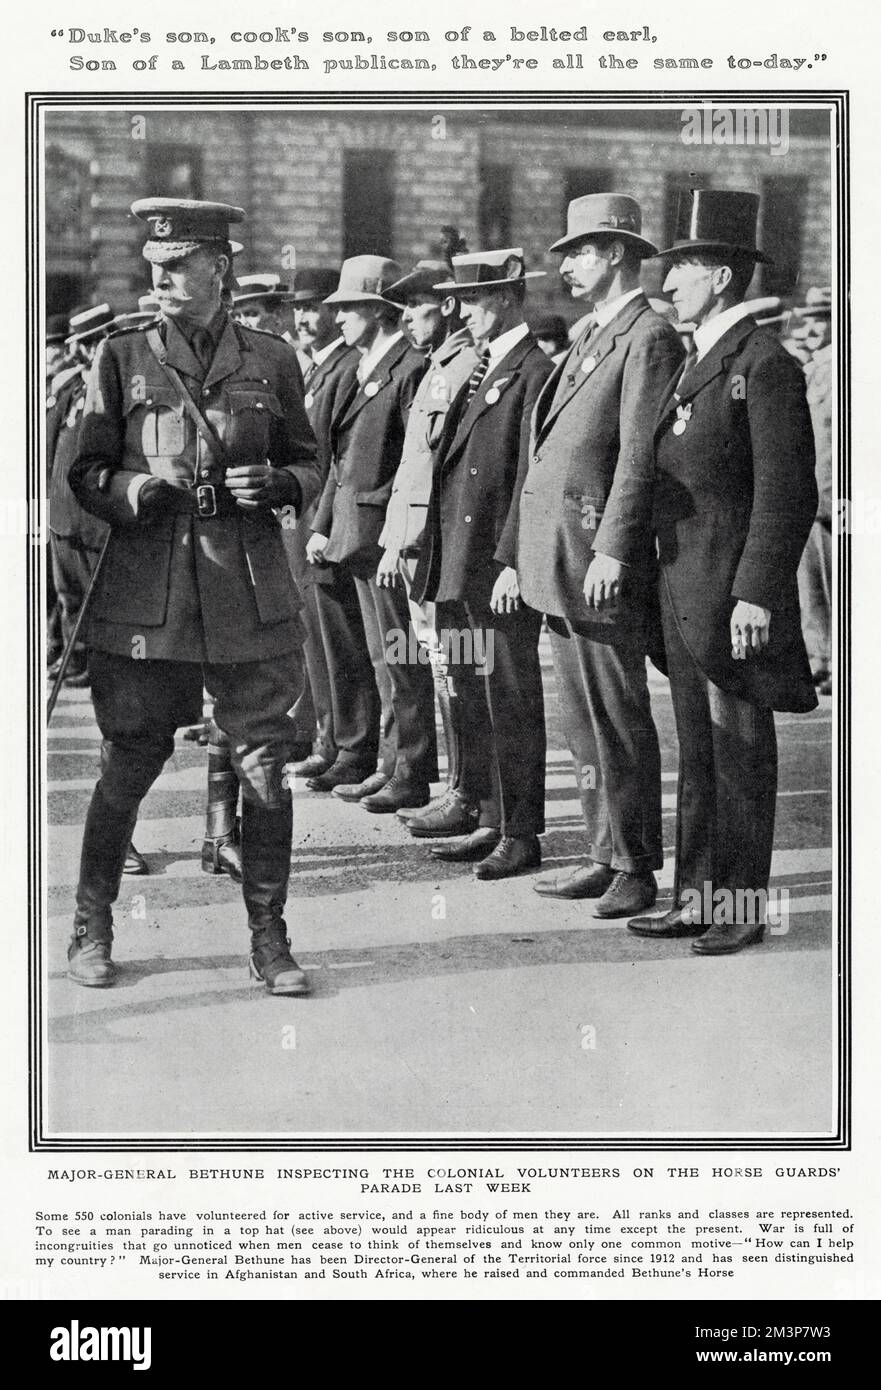 Major-General Bethune inspecting colonial volunteers on the Horse Guards' Parade wearing their civilian clothes, including, at one end, a man in top hat and tails.  Major-General Bethune was Director-General of the Territorial Force since 1912. Stock Photo